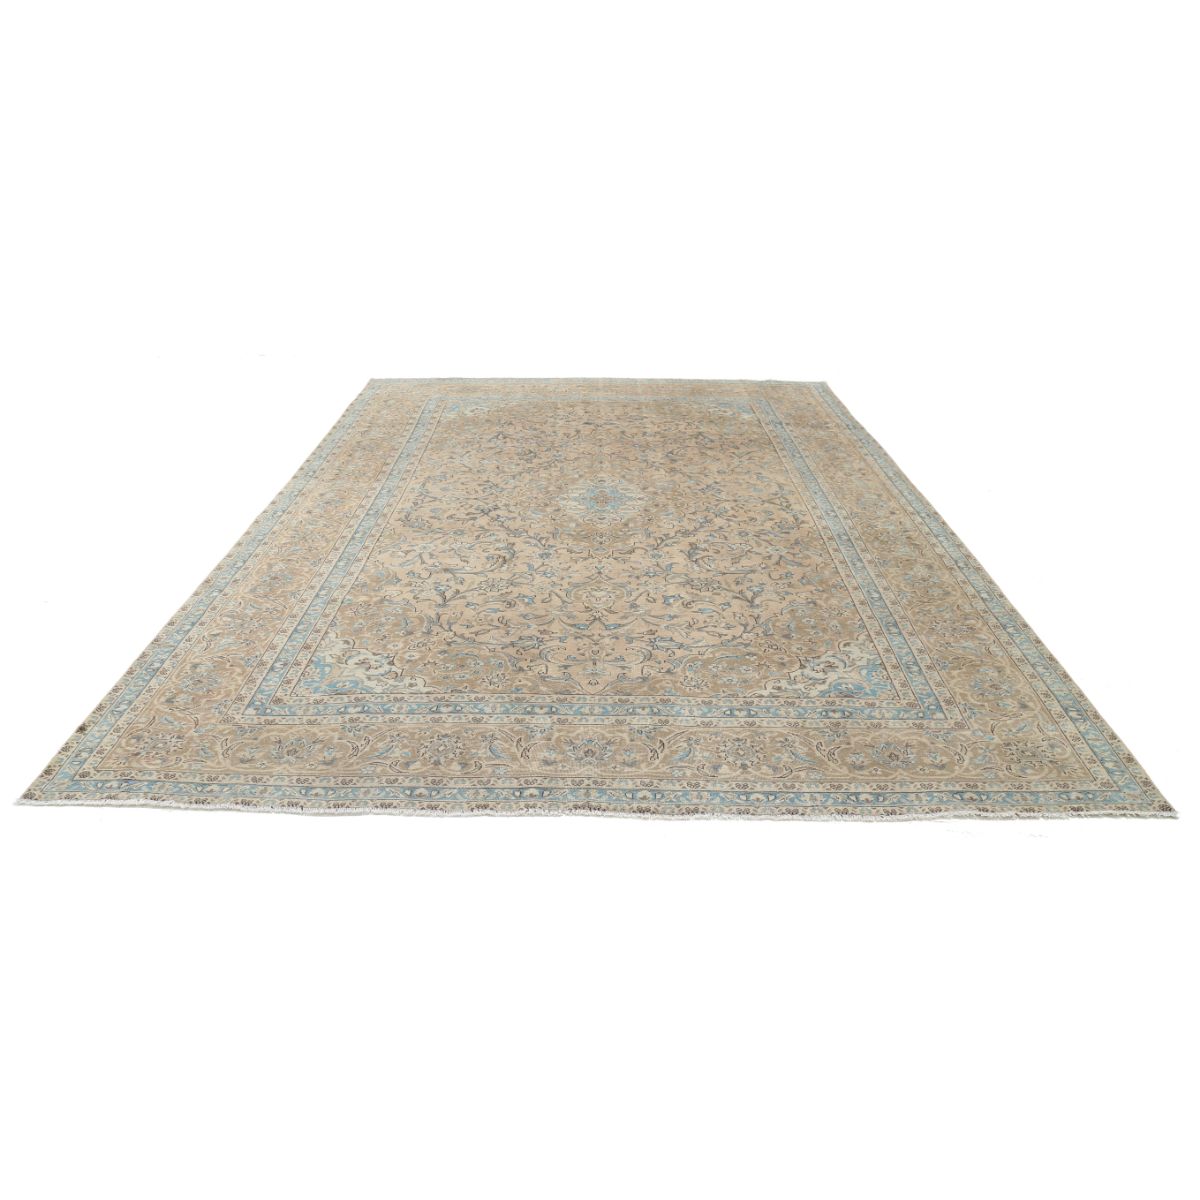 Vintage 9'8" X 13'2" Wool Hand-Knotted Rug